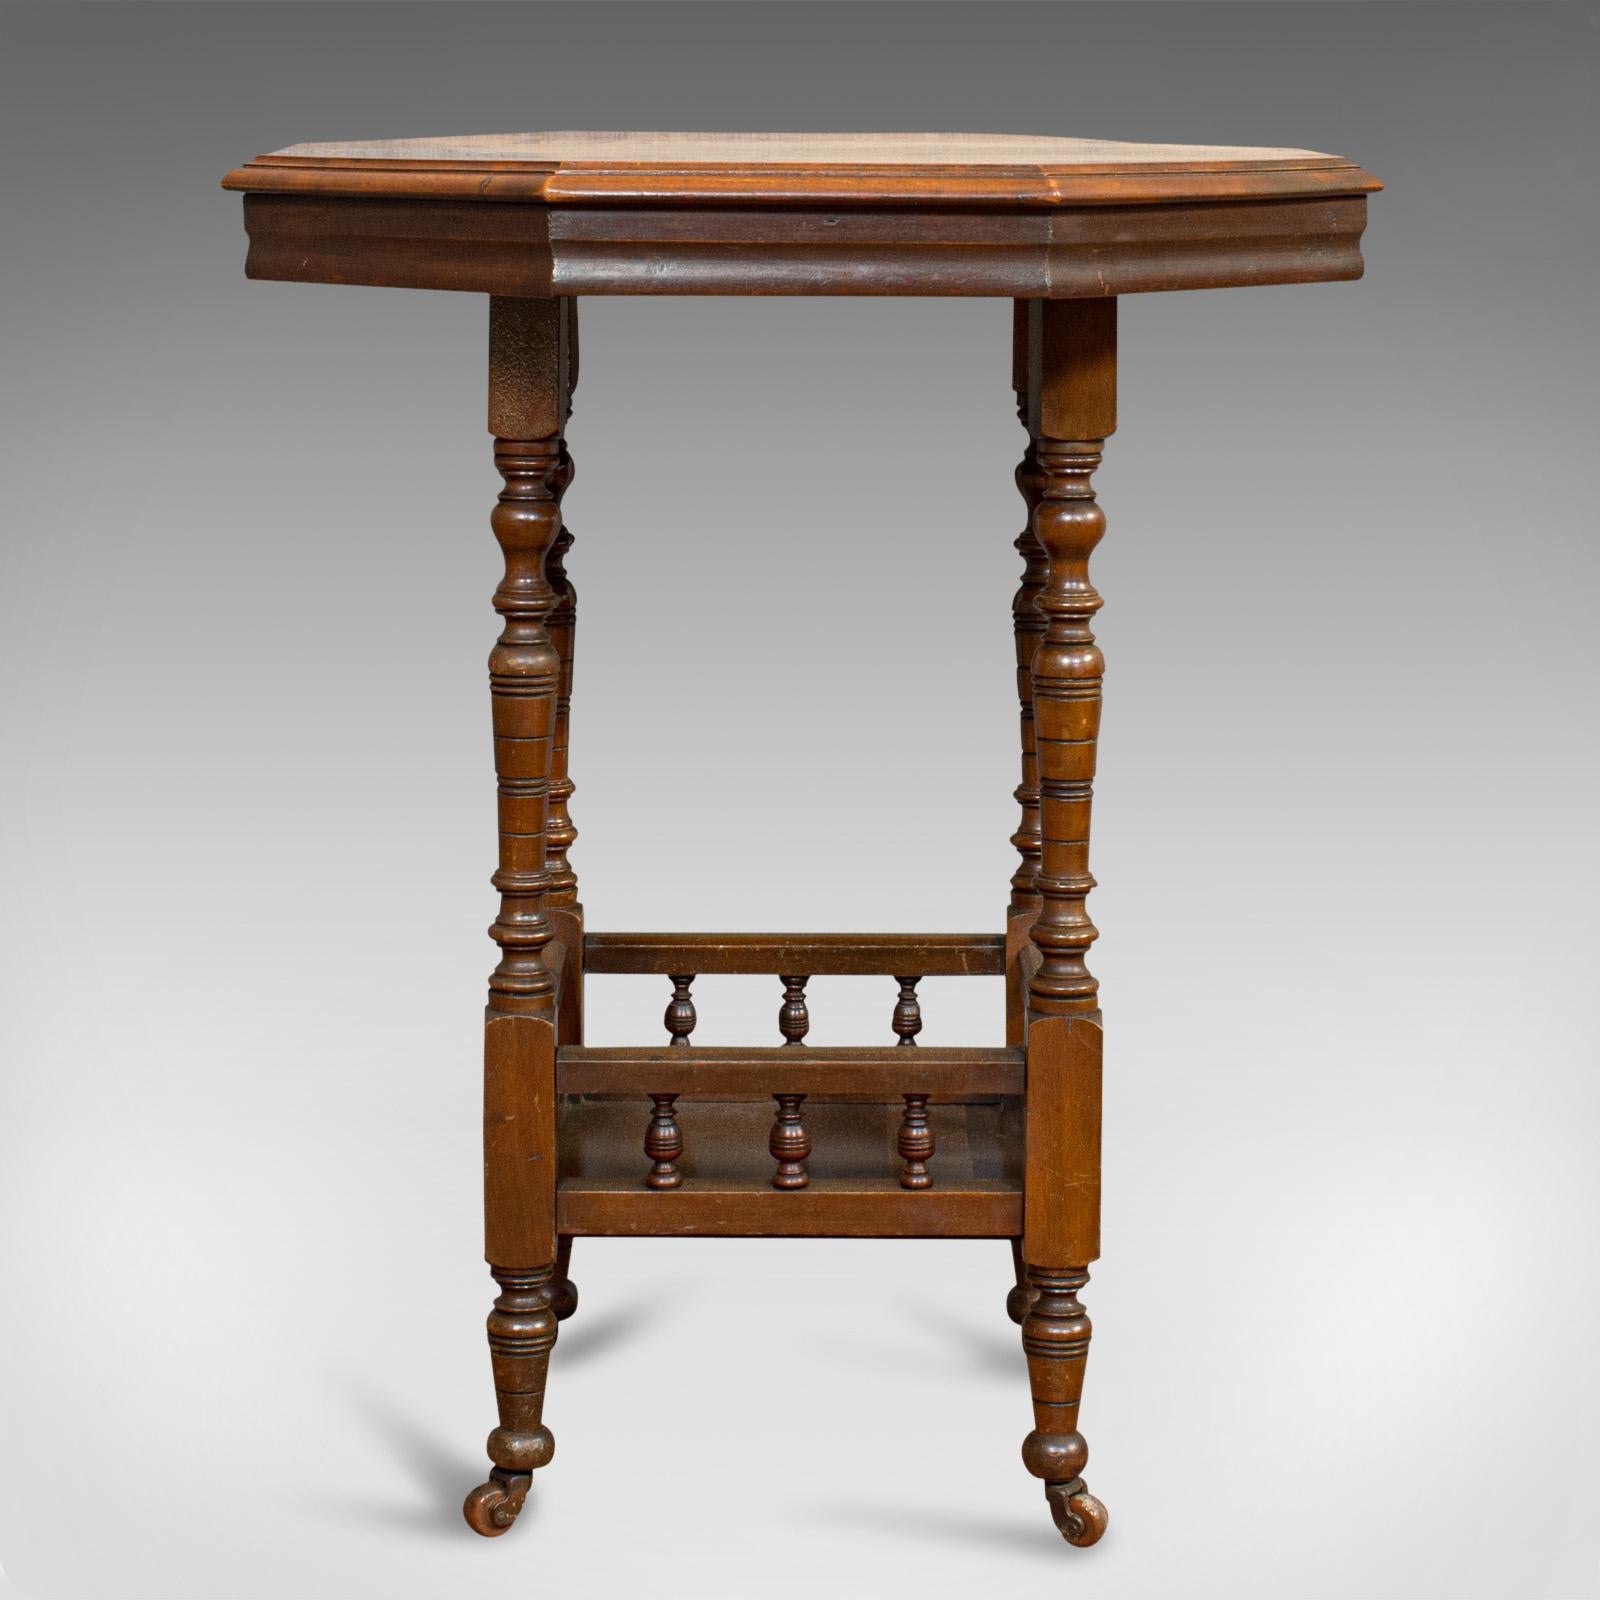 This is an antique lamp table. An English, walnut octagonal side or games table, dating to the Edwardian period, circa 1910.

Fine Edwardian style
Displays a desirable aged patina
Select walnut with fine grain interest
Rich, consistent hues to